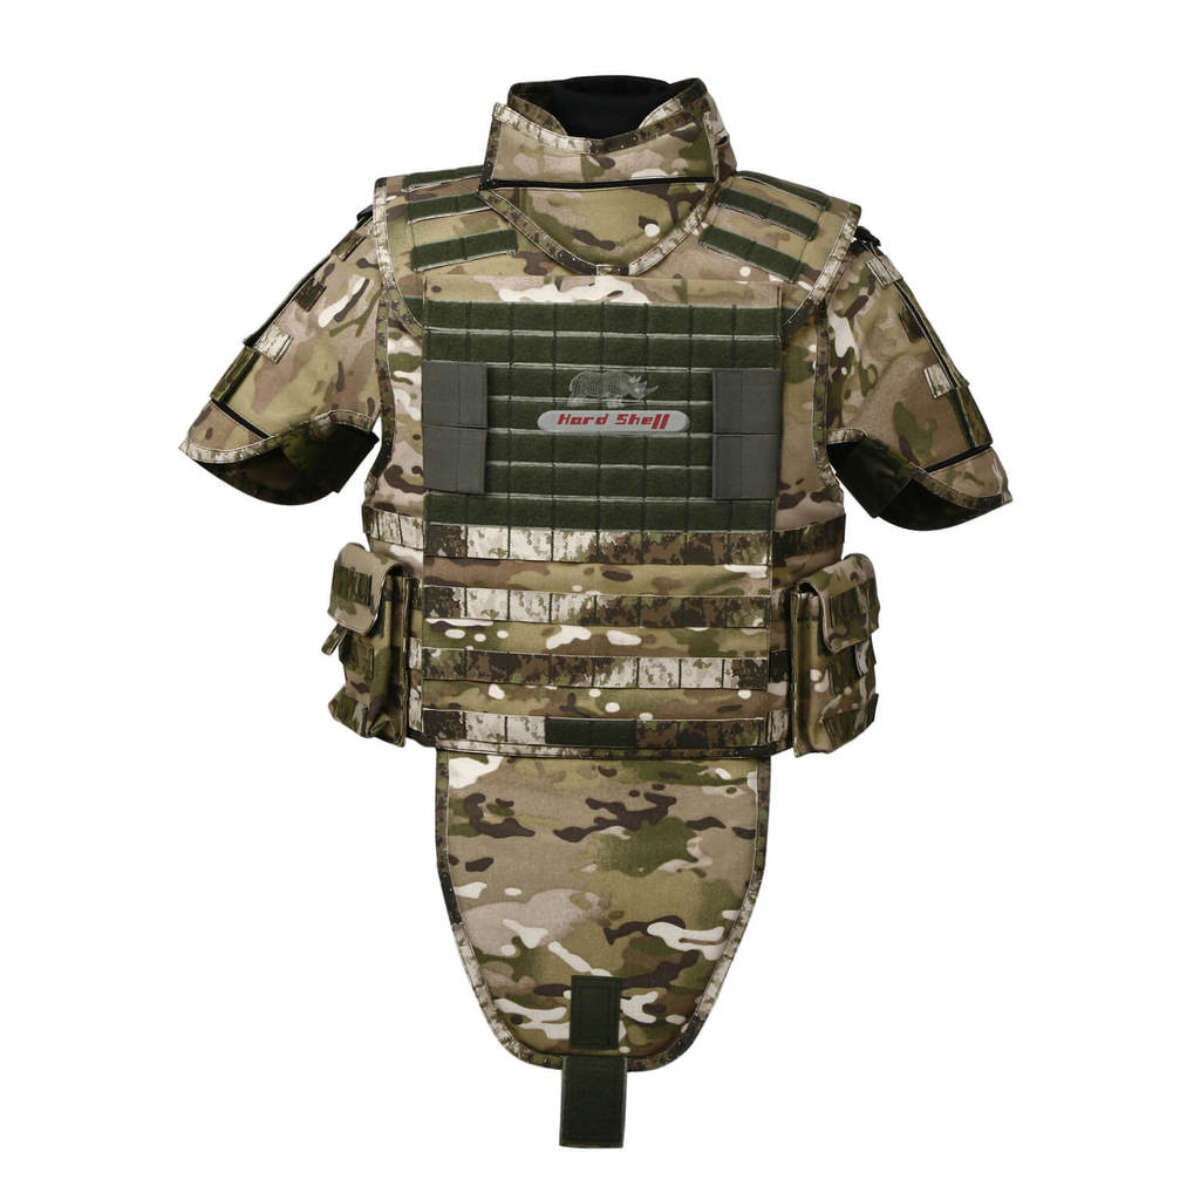 File:Bullet-Proof-Jackets1.png - Wikipedia